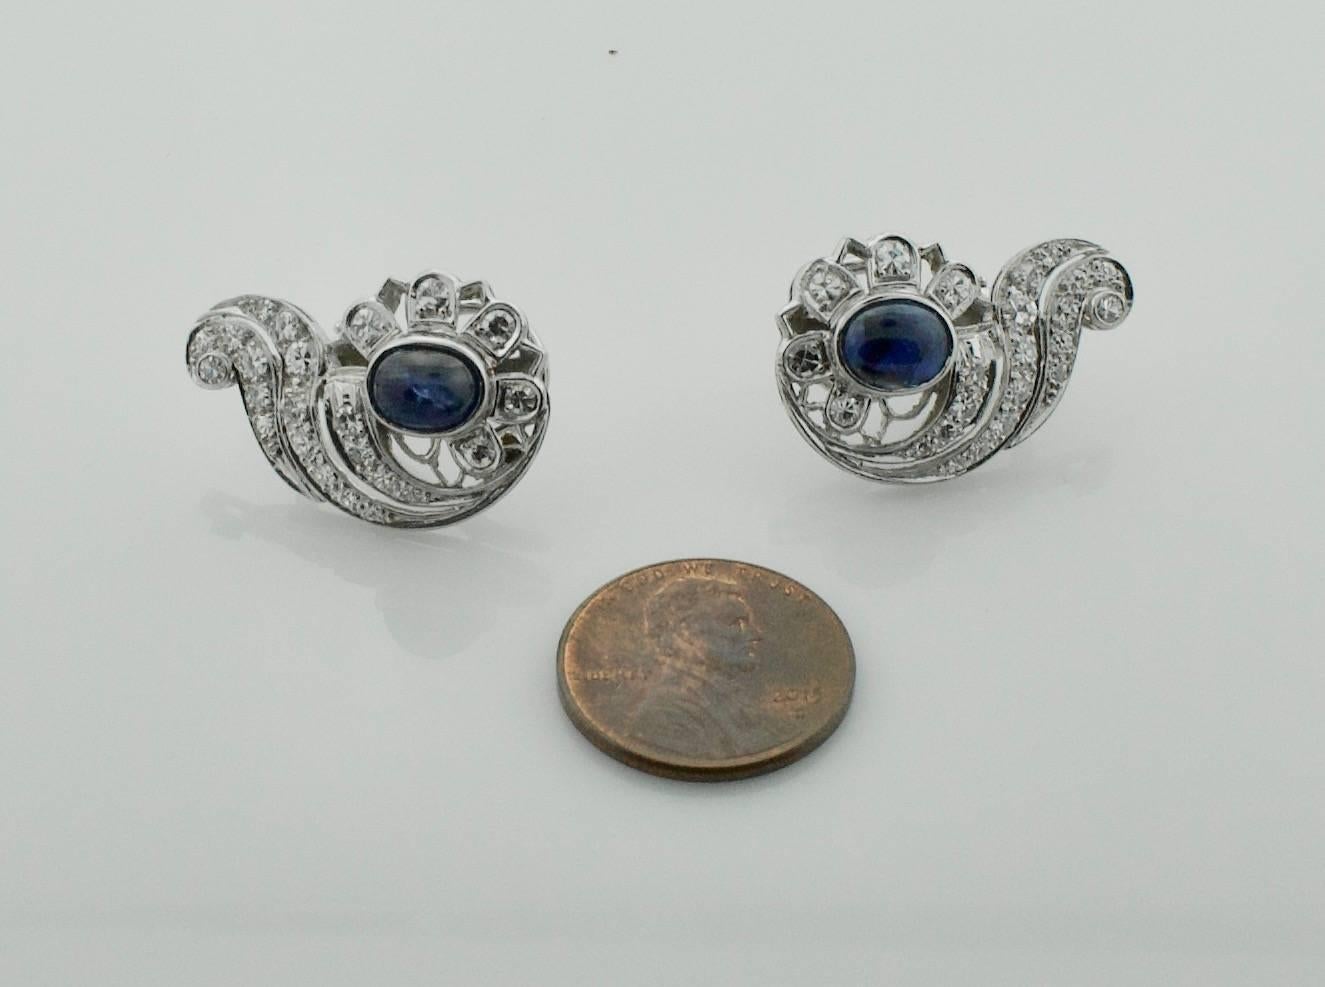 1940's Sapphire and Diamond Earrings
Handmade.  A Left and Right.  Can be worn either way.
Two Oval Cabochon Sapphire weighing 5.00 carats approximately 
Forty Eight Round Cut Diamonds weighing 1.70 carats approximately 
Comfortable, Collectable and